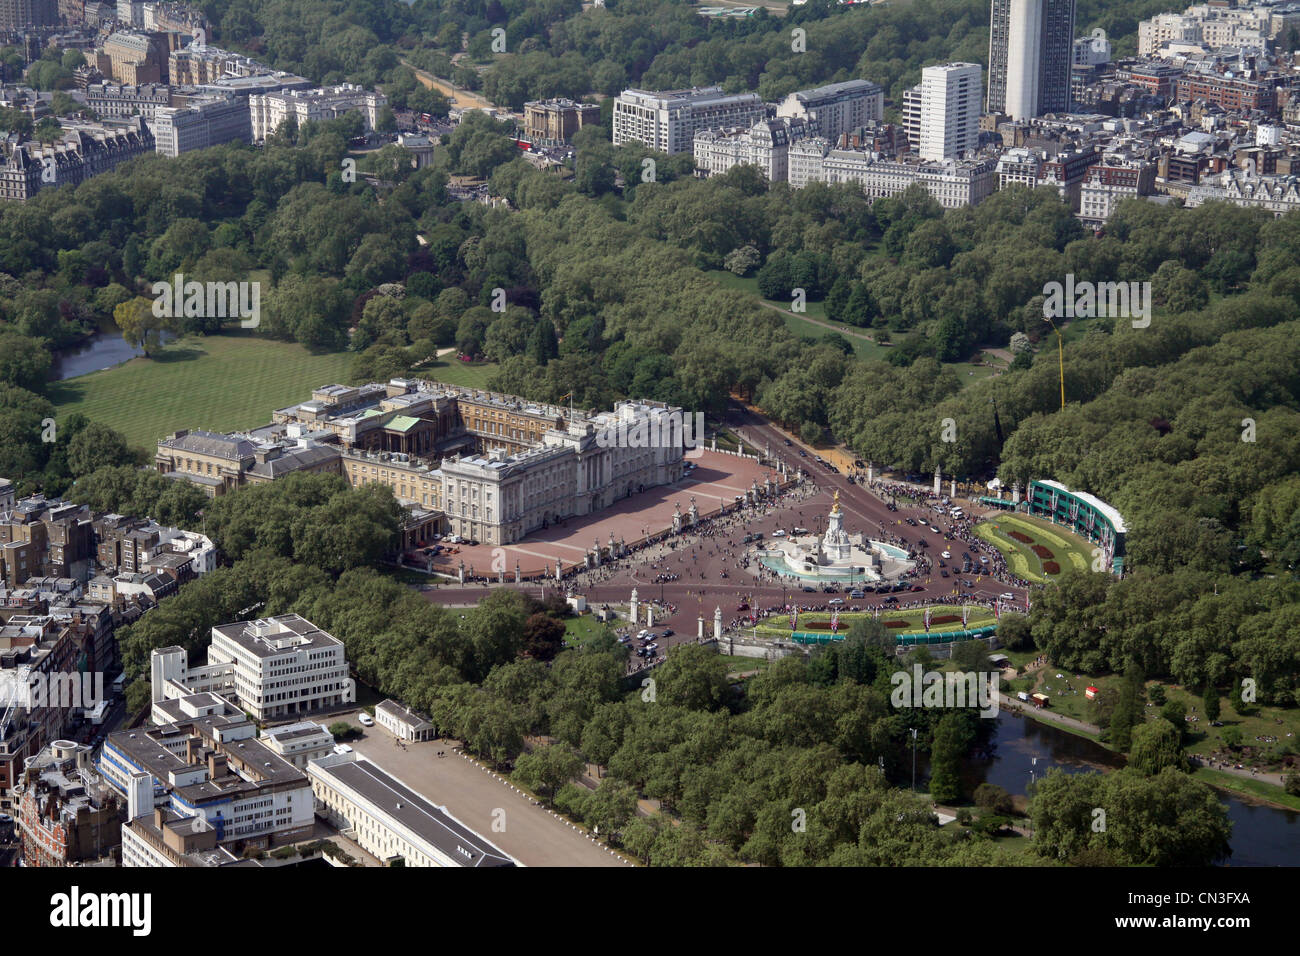 aerial view of Buckingham Palace, the Queen's residence, London, UK Stock Photo